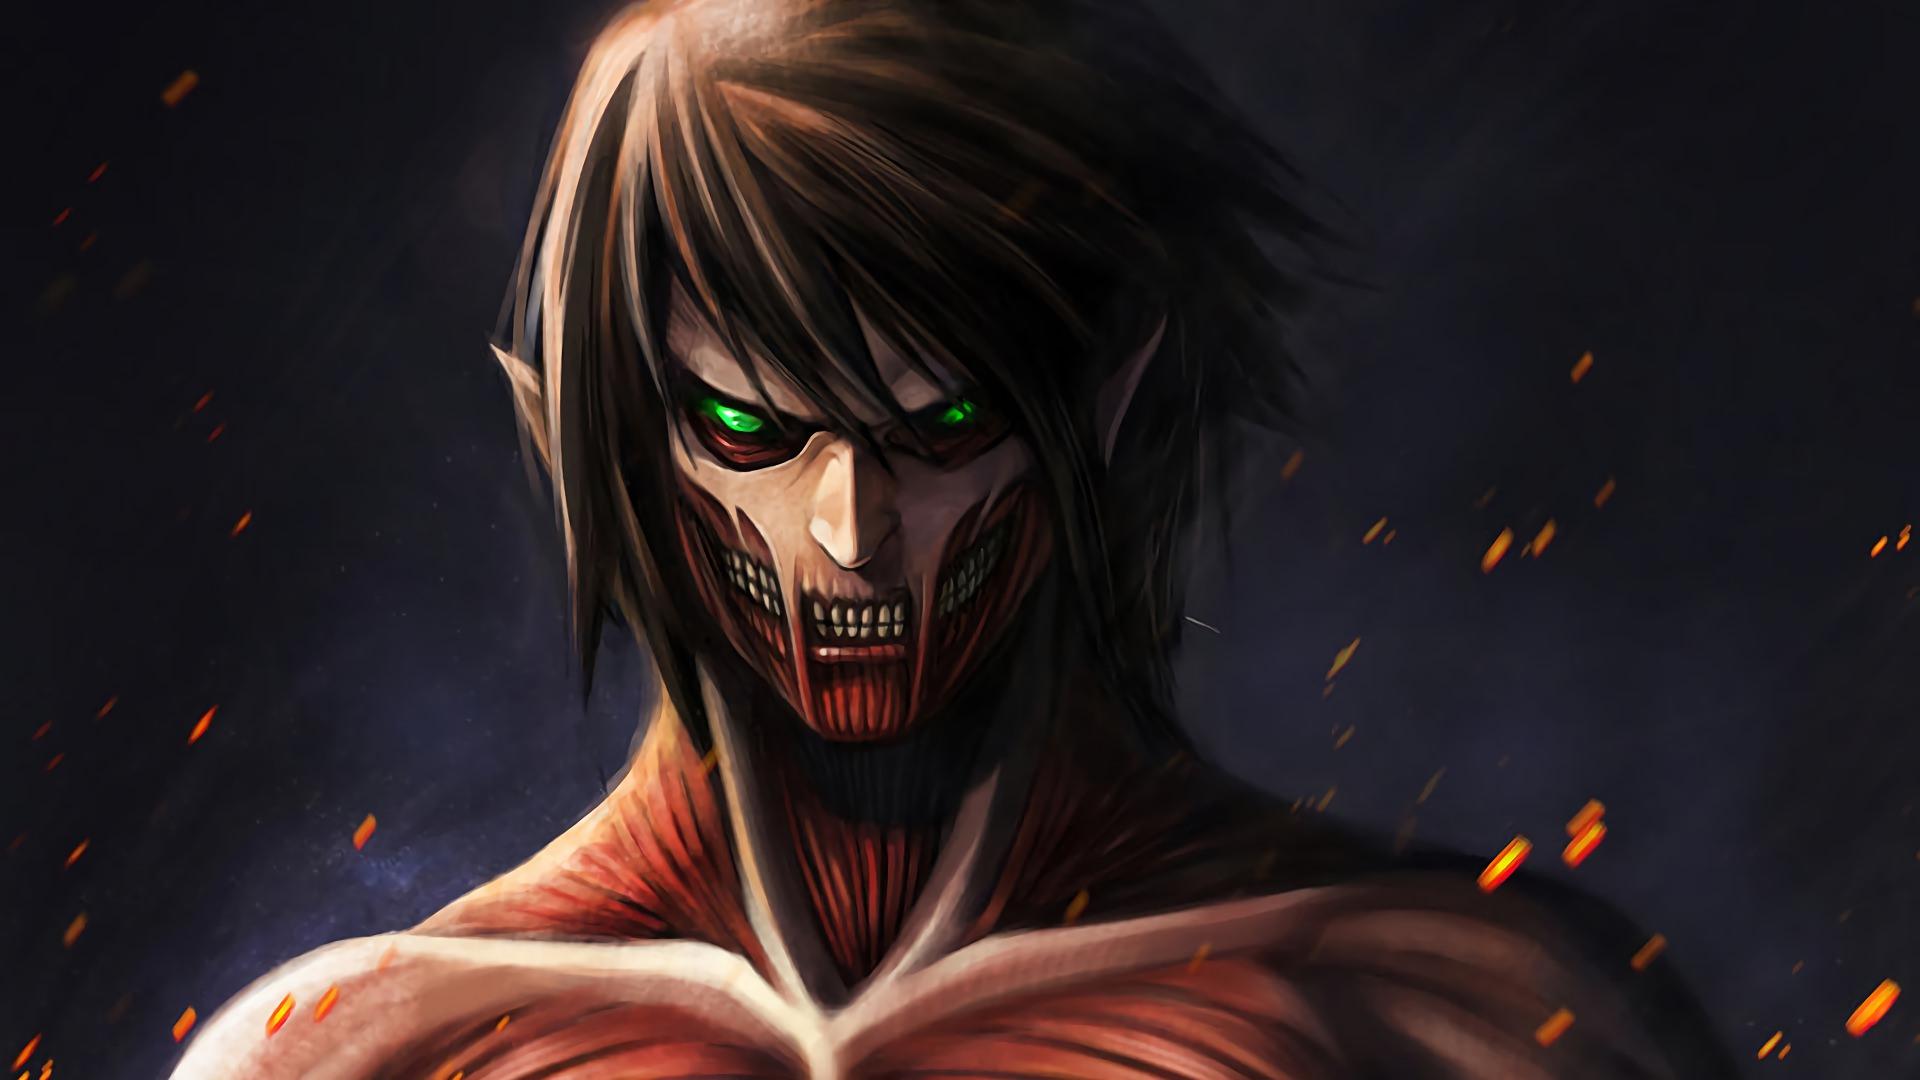 Aesthetic Attack On Titan Wallpapers - Wallpaper Cave